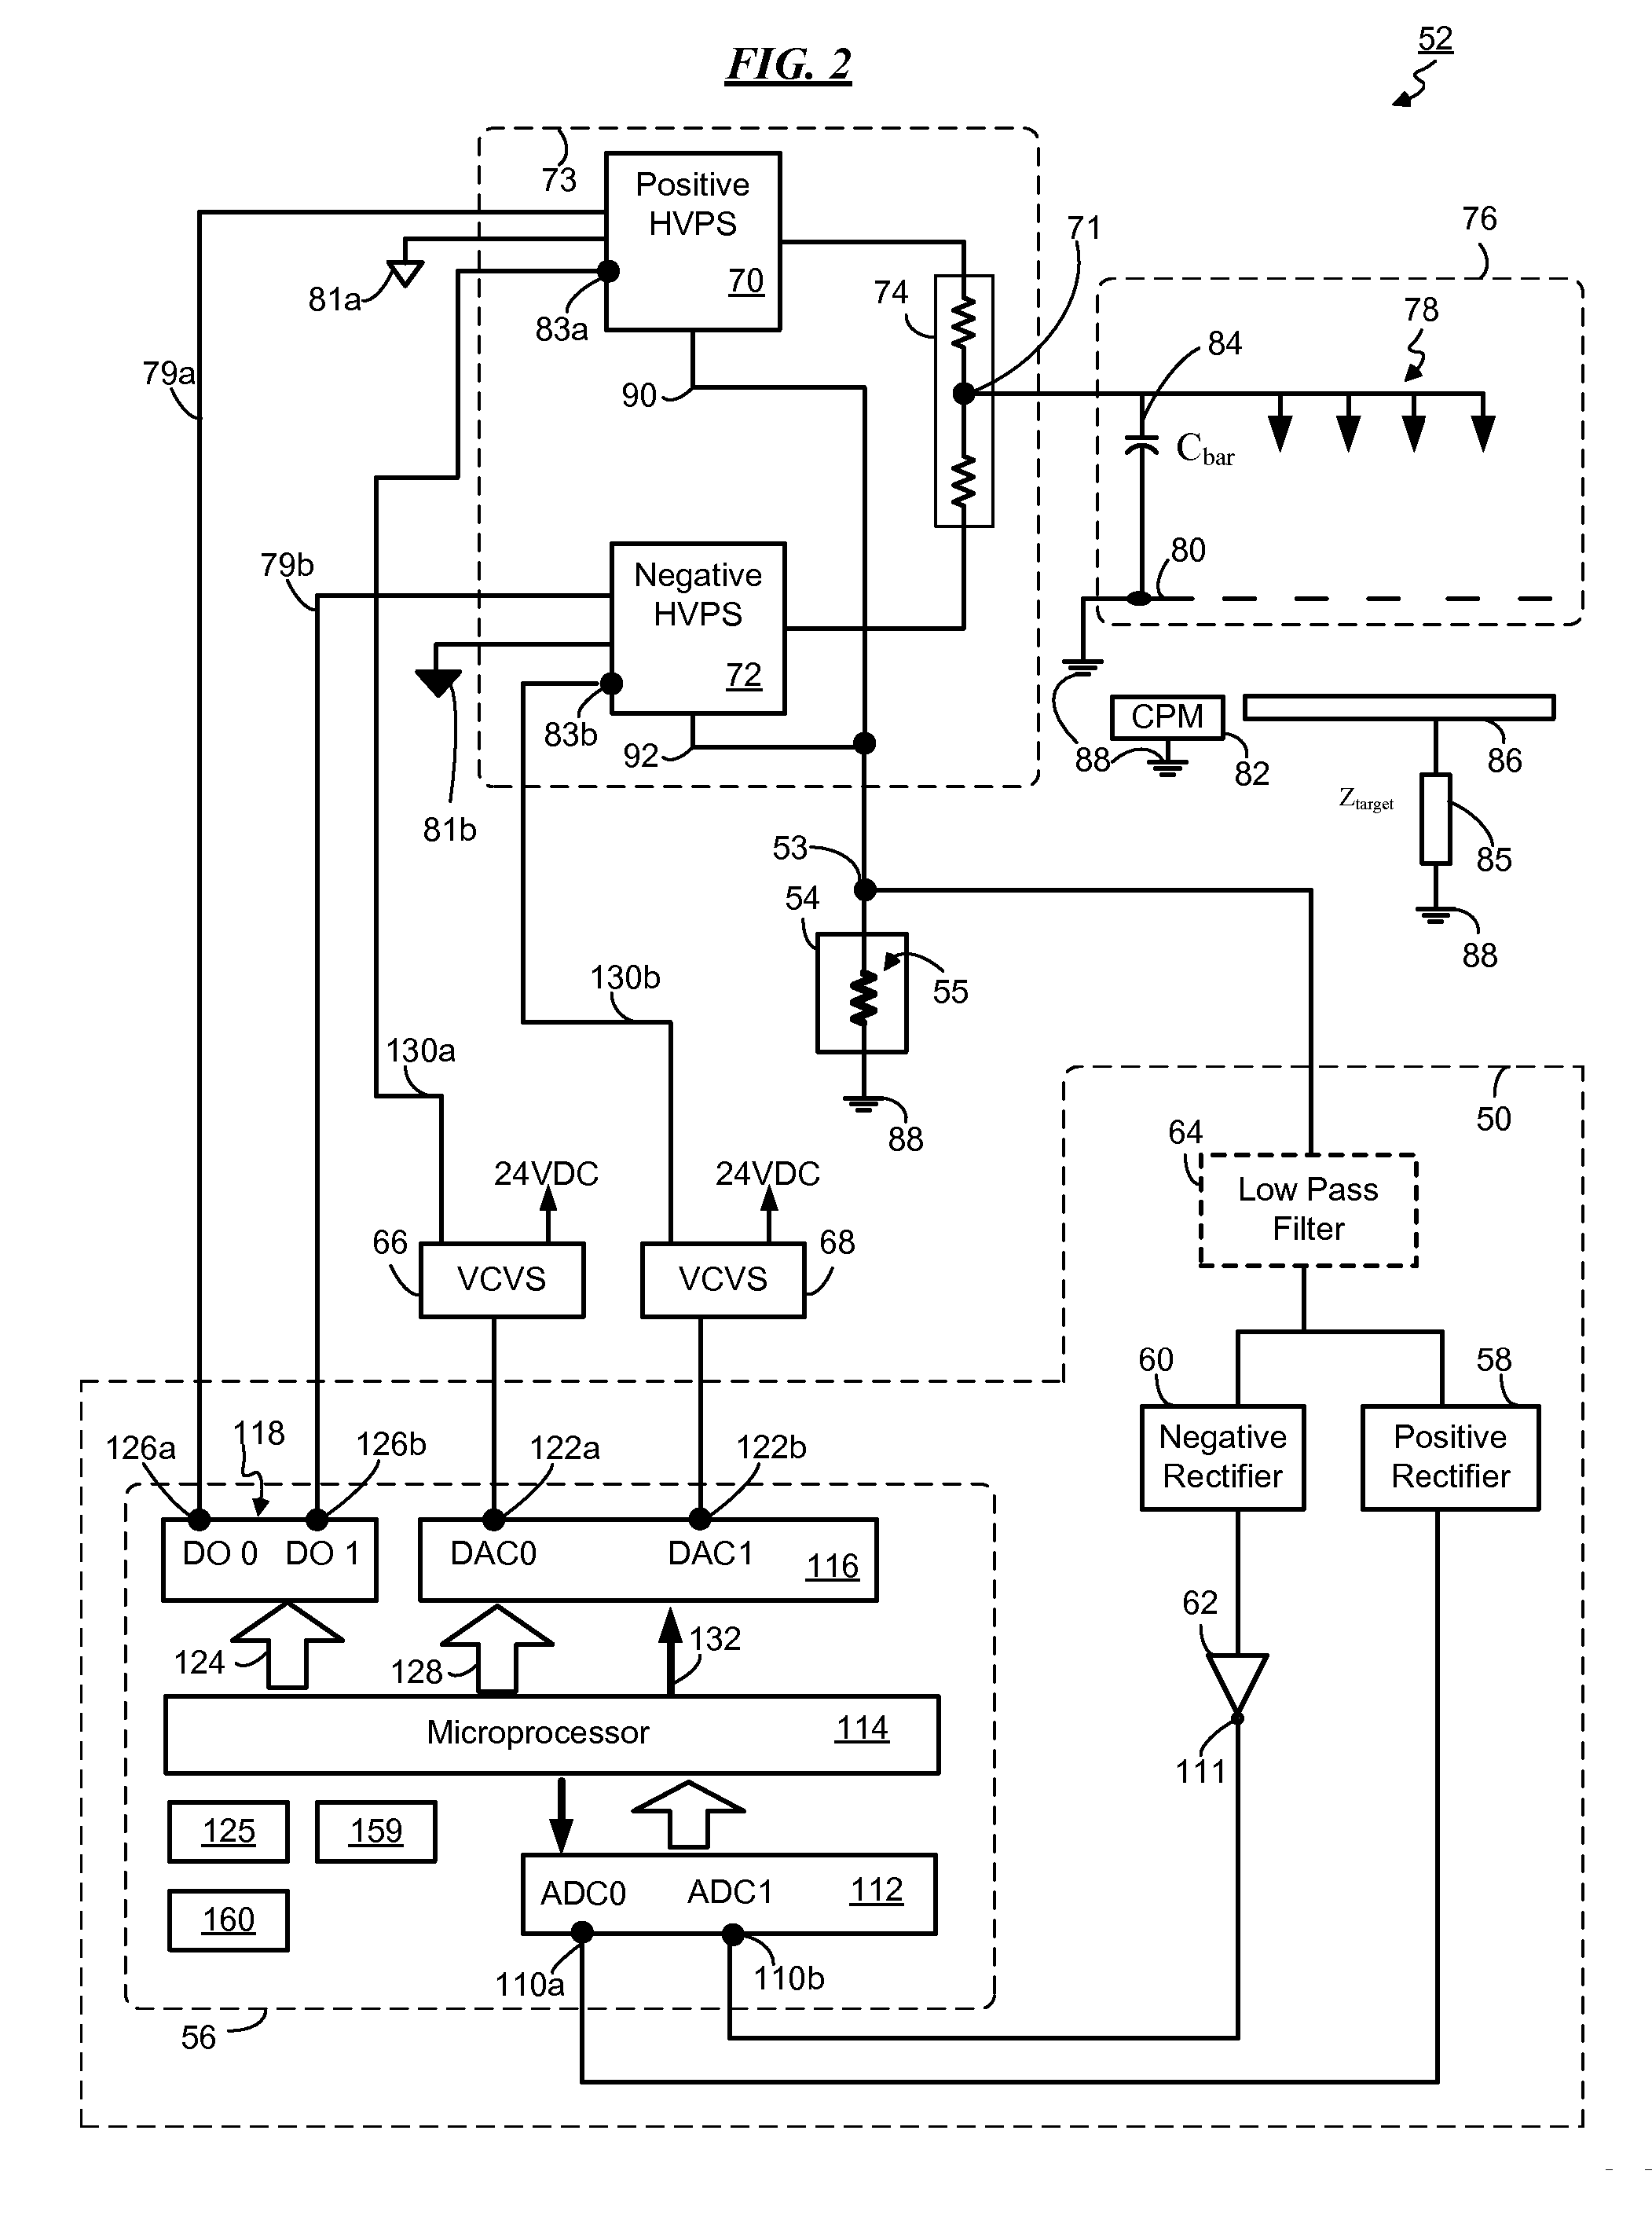 Control system for static neutralizer